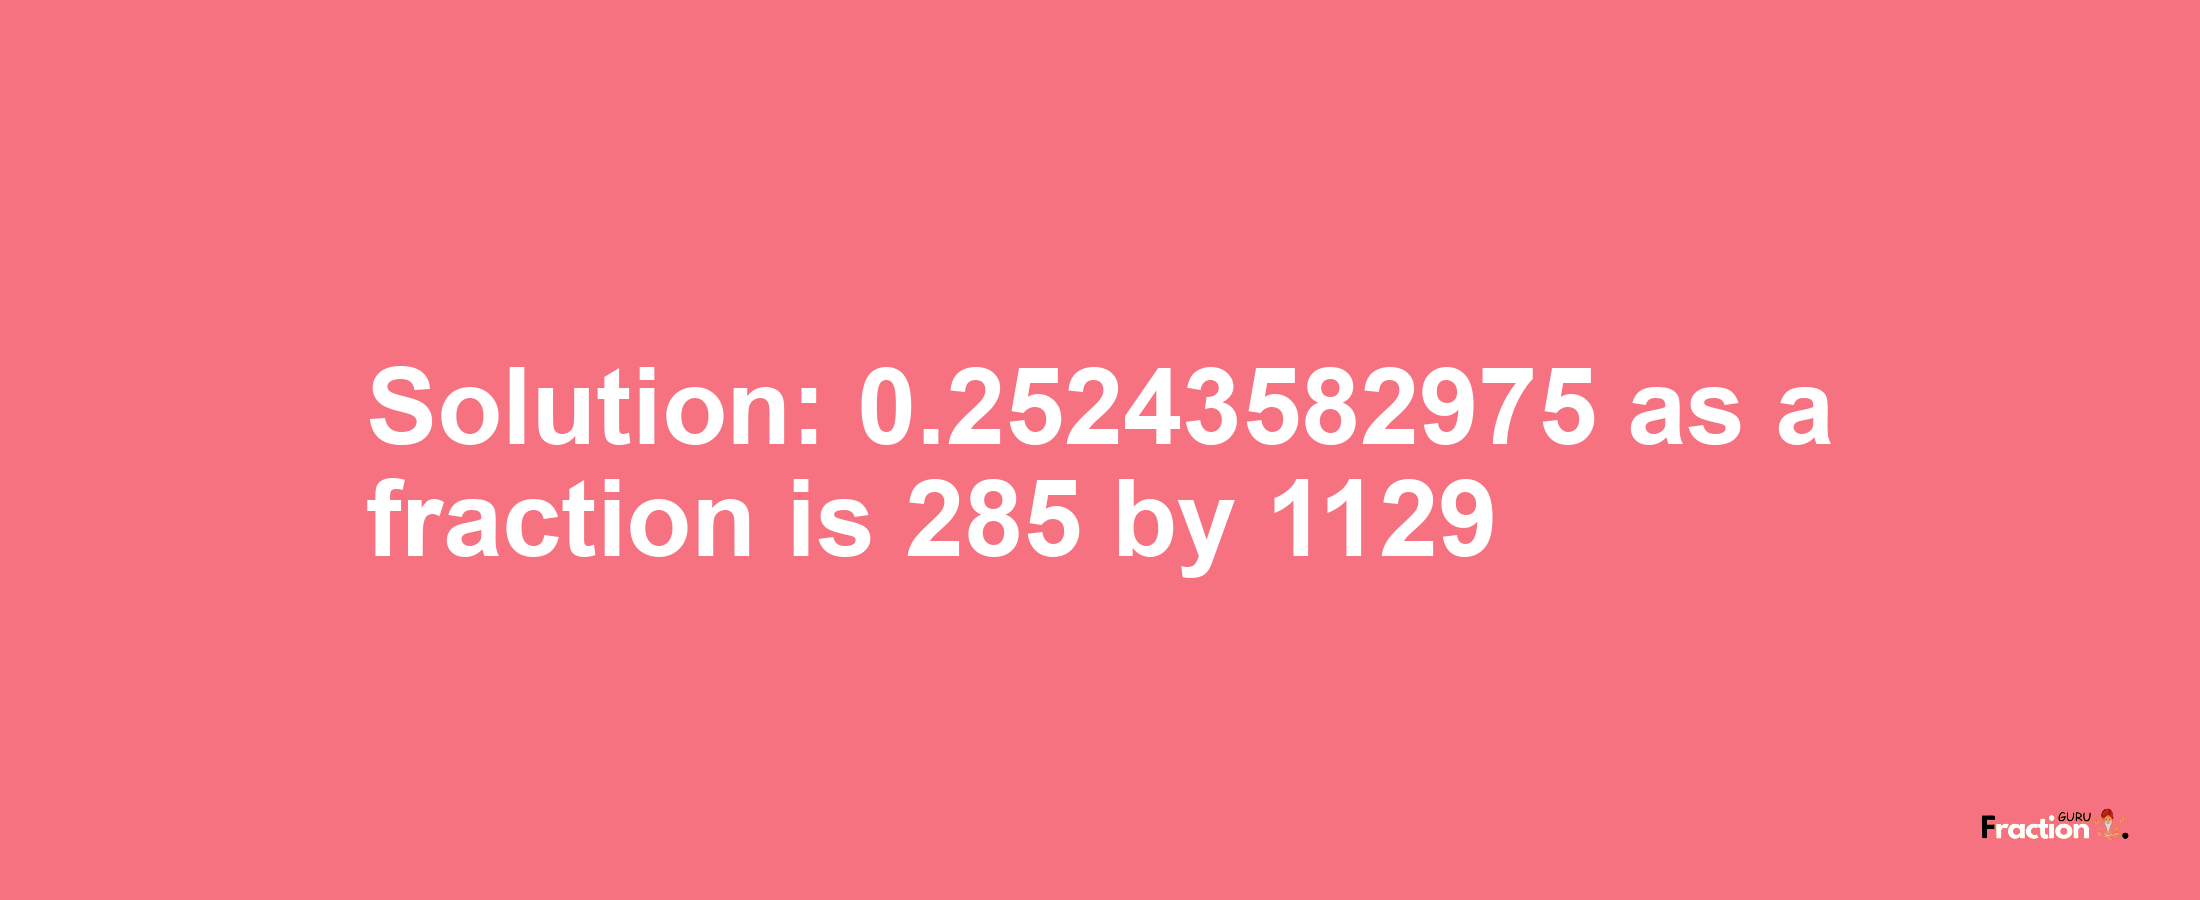 Solution:0.25243582975 as a fraction is 285/1129